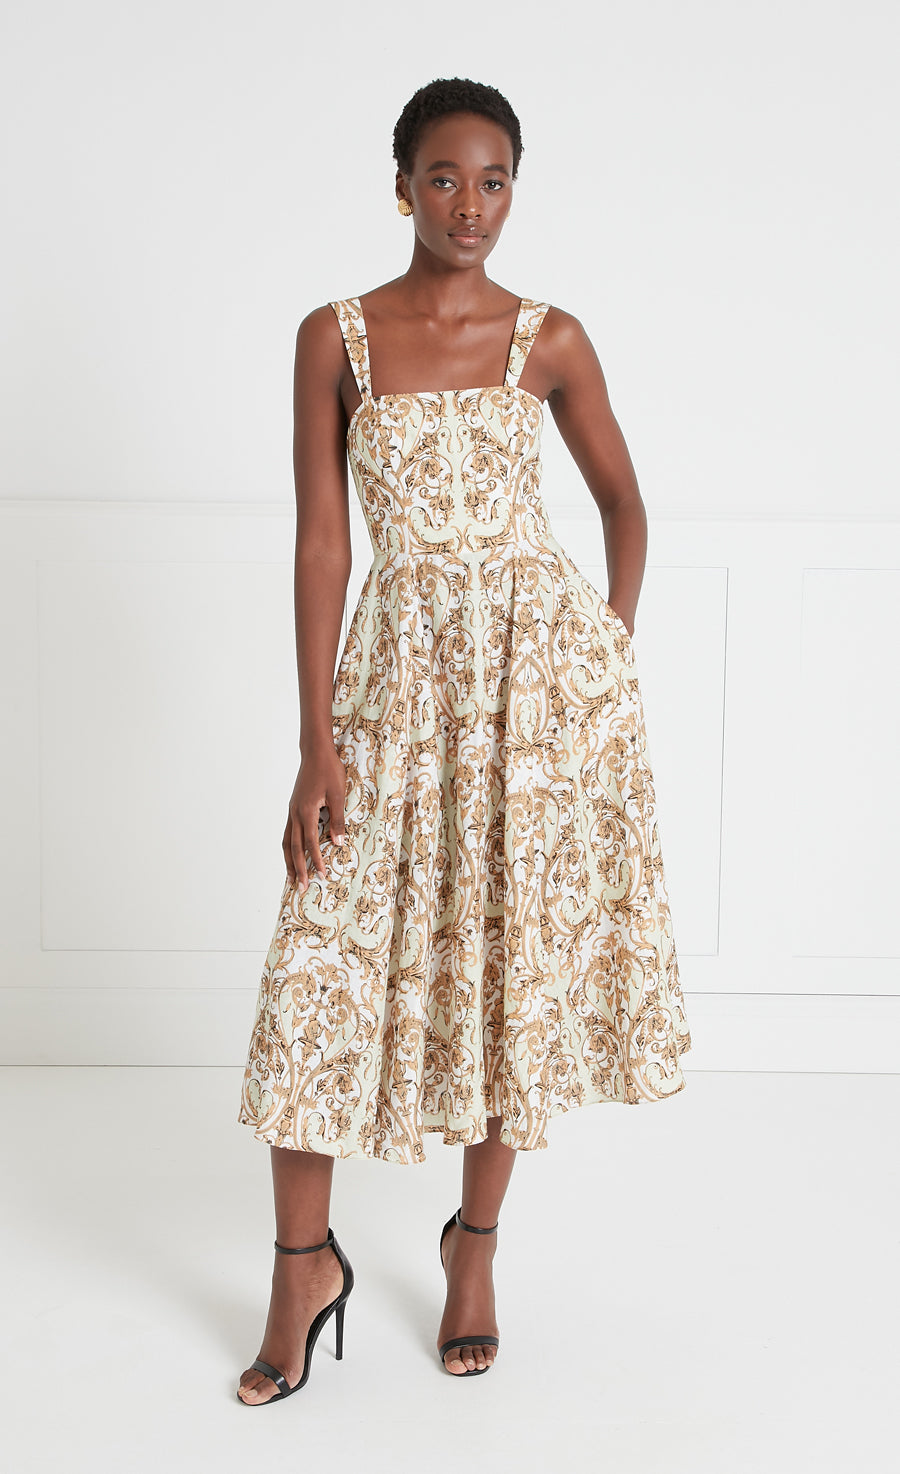 Dresses & Jumpsuits | Luxury Gowns and Daywear – Temperley London 